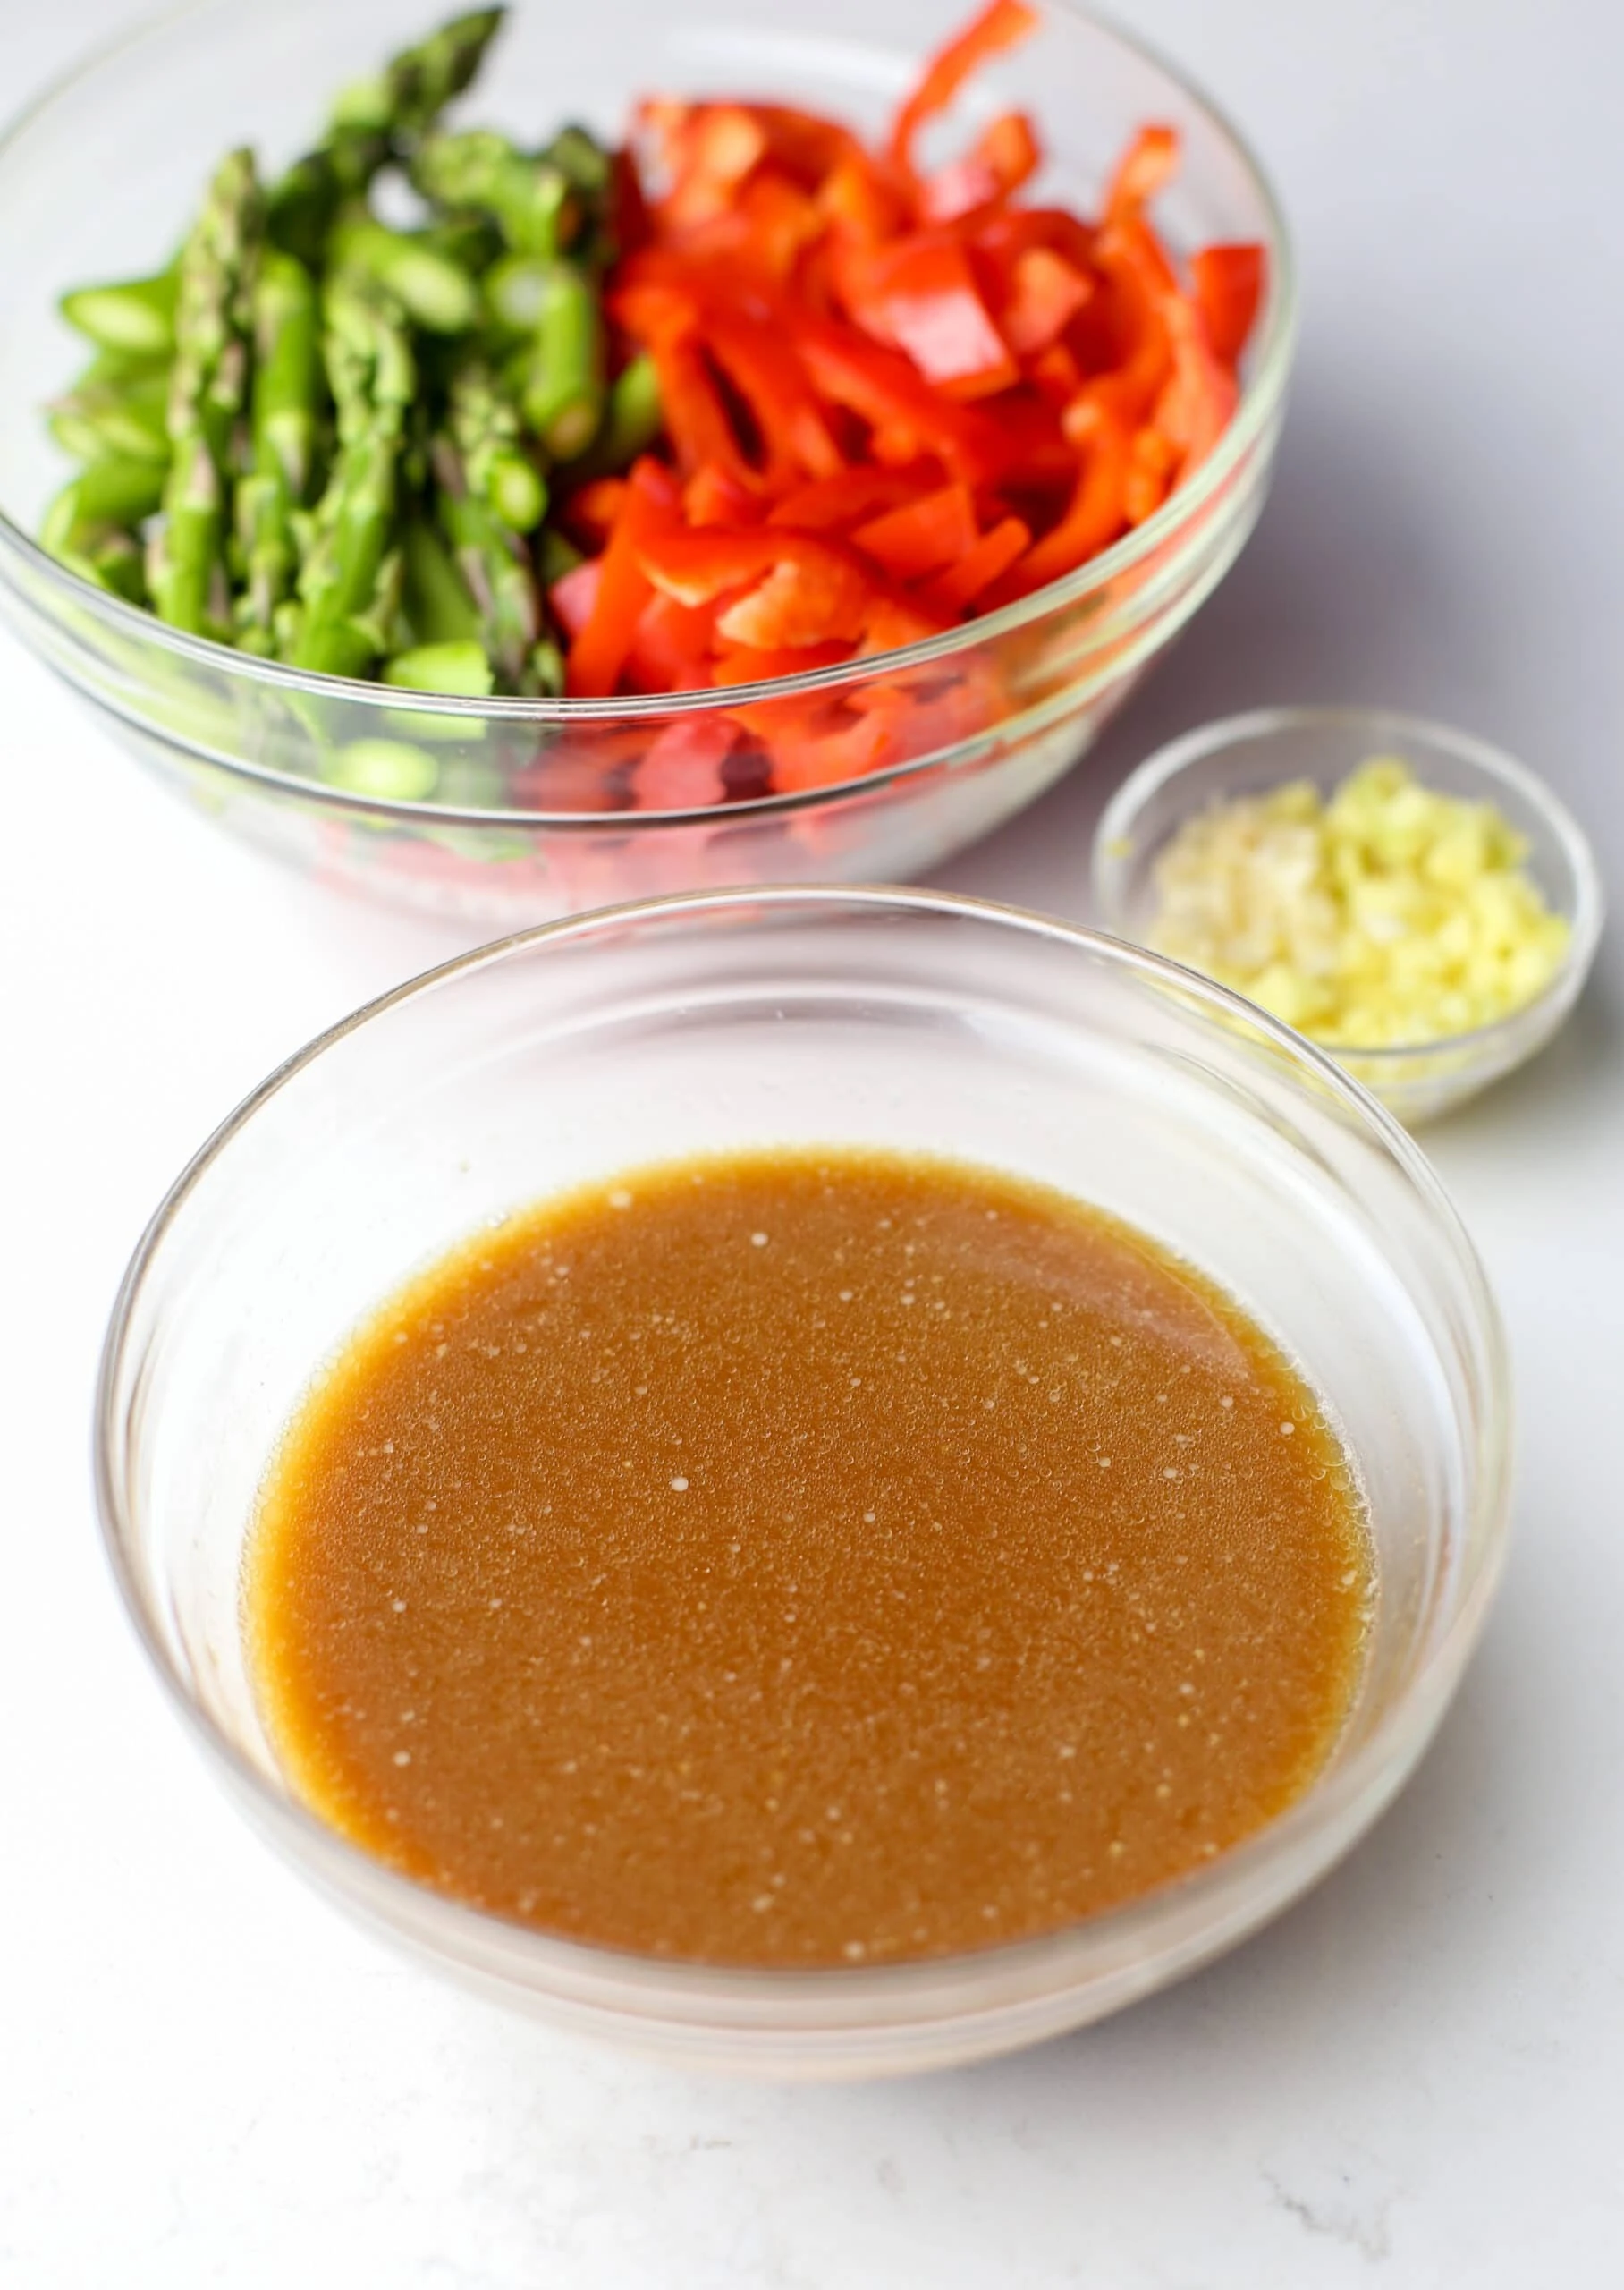 Stir-fry sauce, minced ginger and garlic, and sliced asparagus and bell pepper in three separate glass bowls.